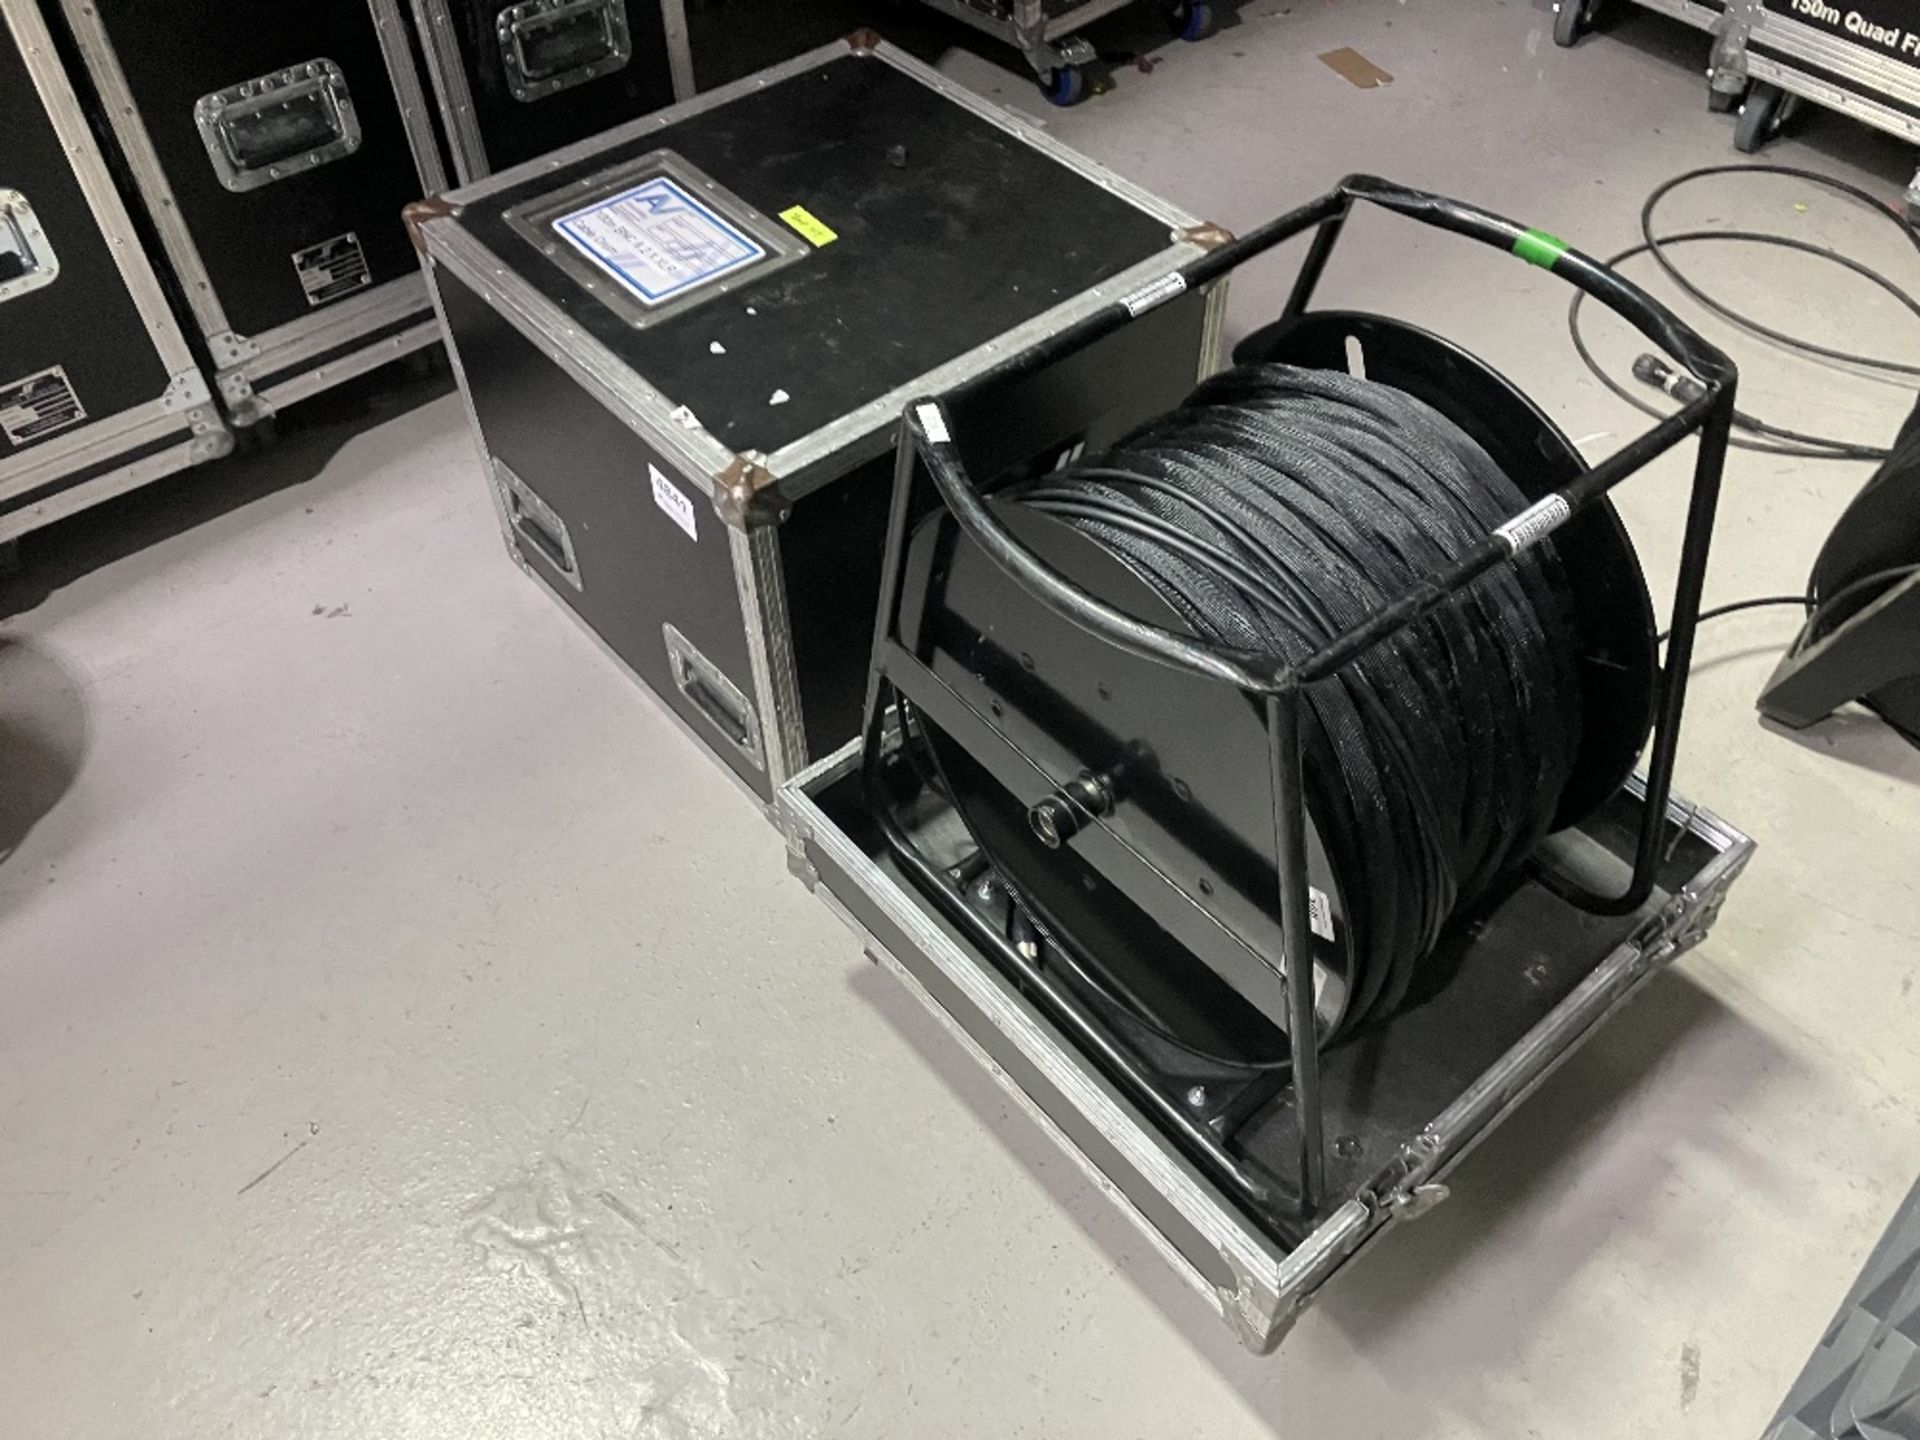 100m Bnc & (2) XLR Cables With Heavy Duty Mobile Flight Case - Image 4 of 11